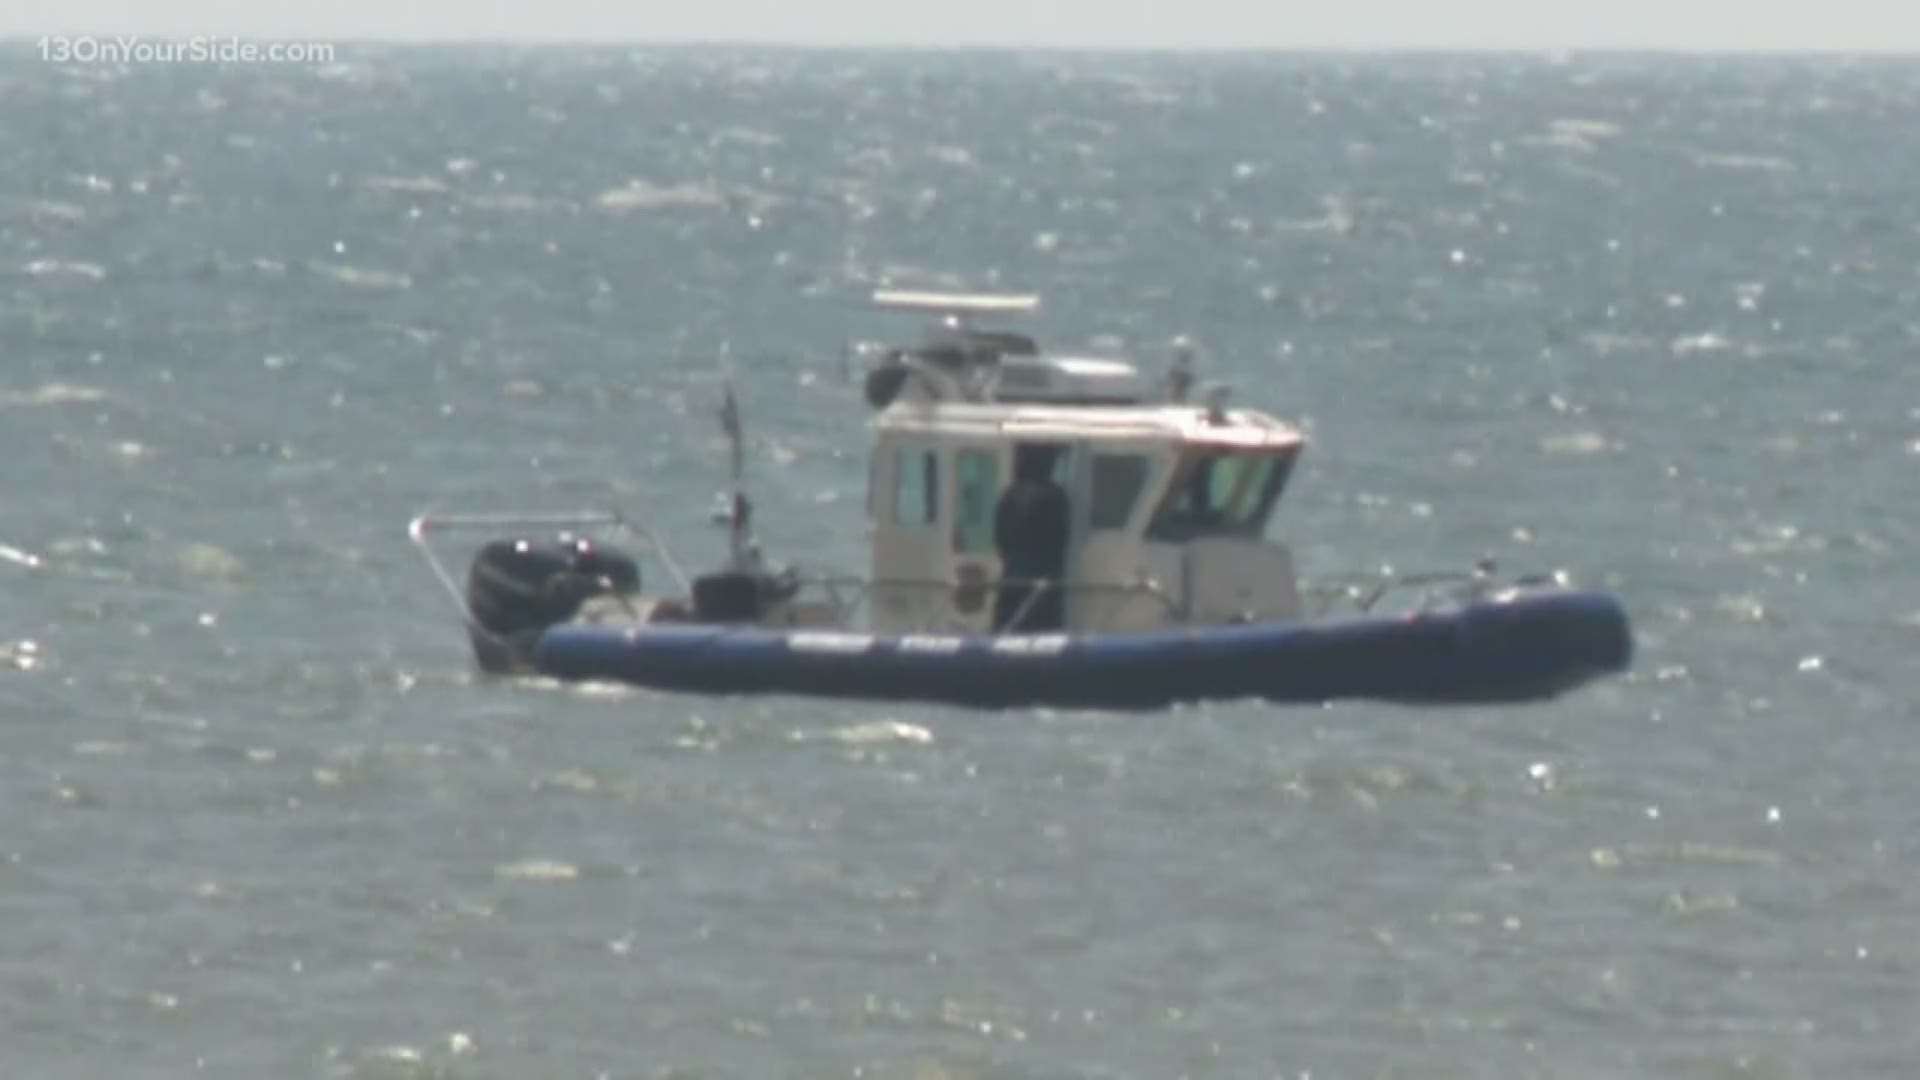 Search crews continue to look for 18-year-old in Lake Michigan